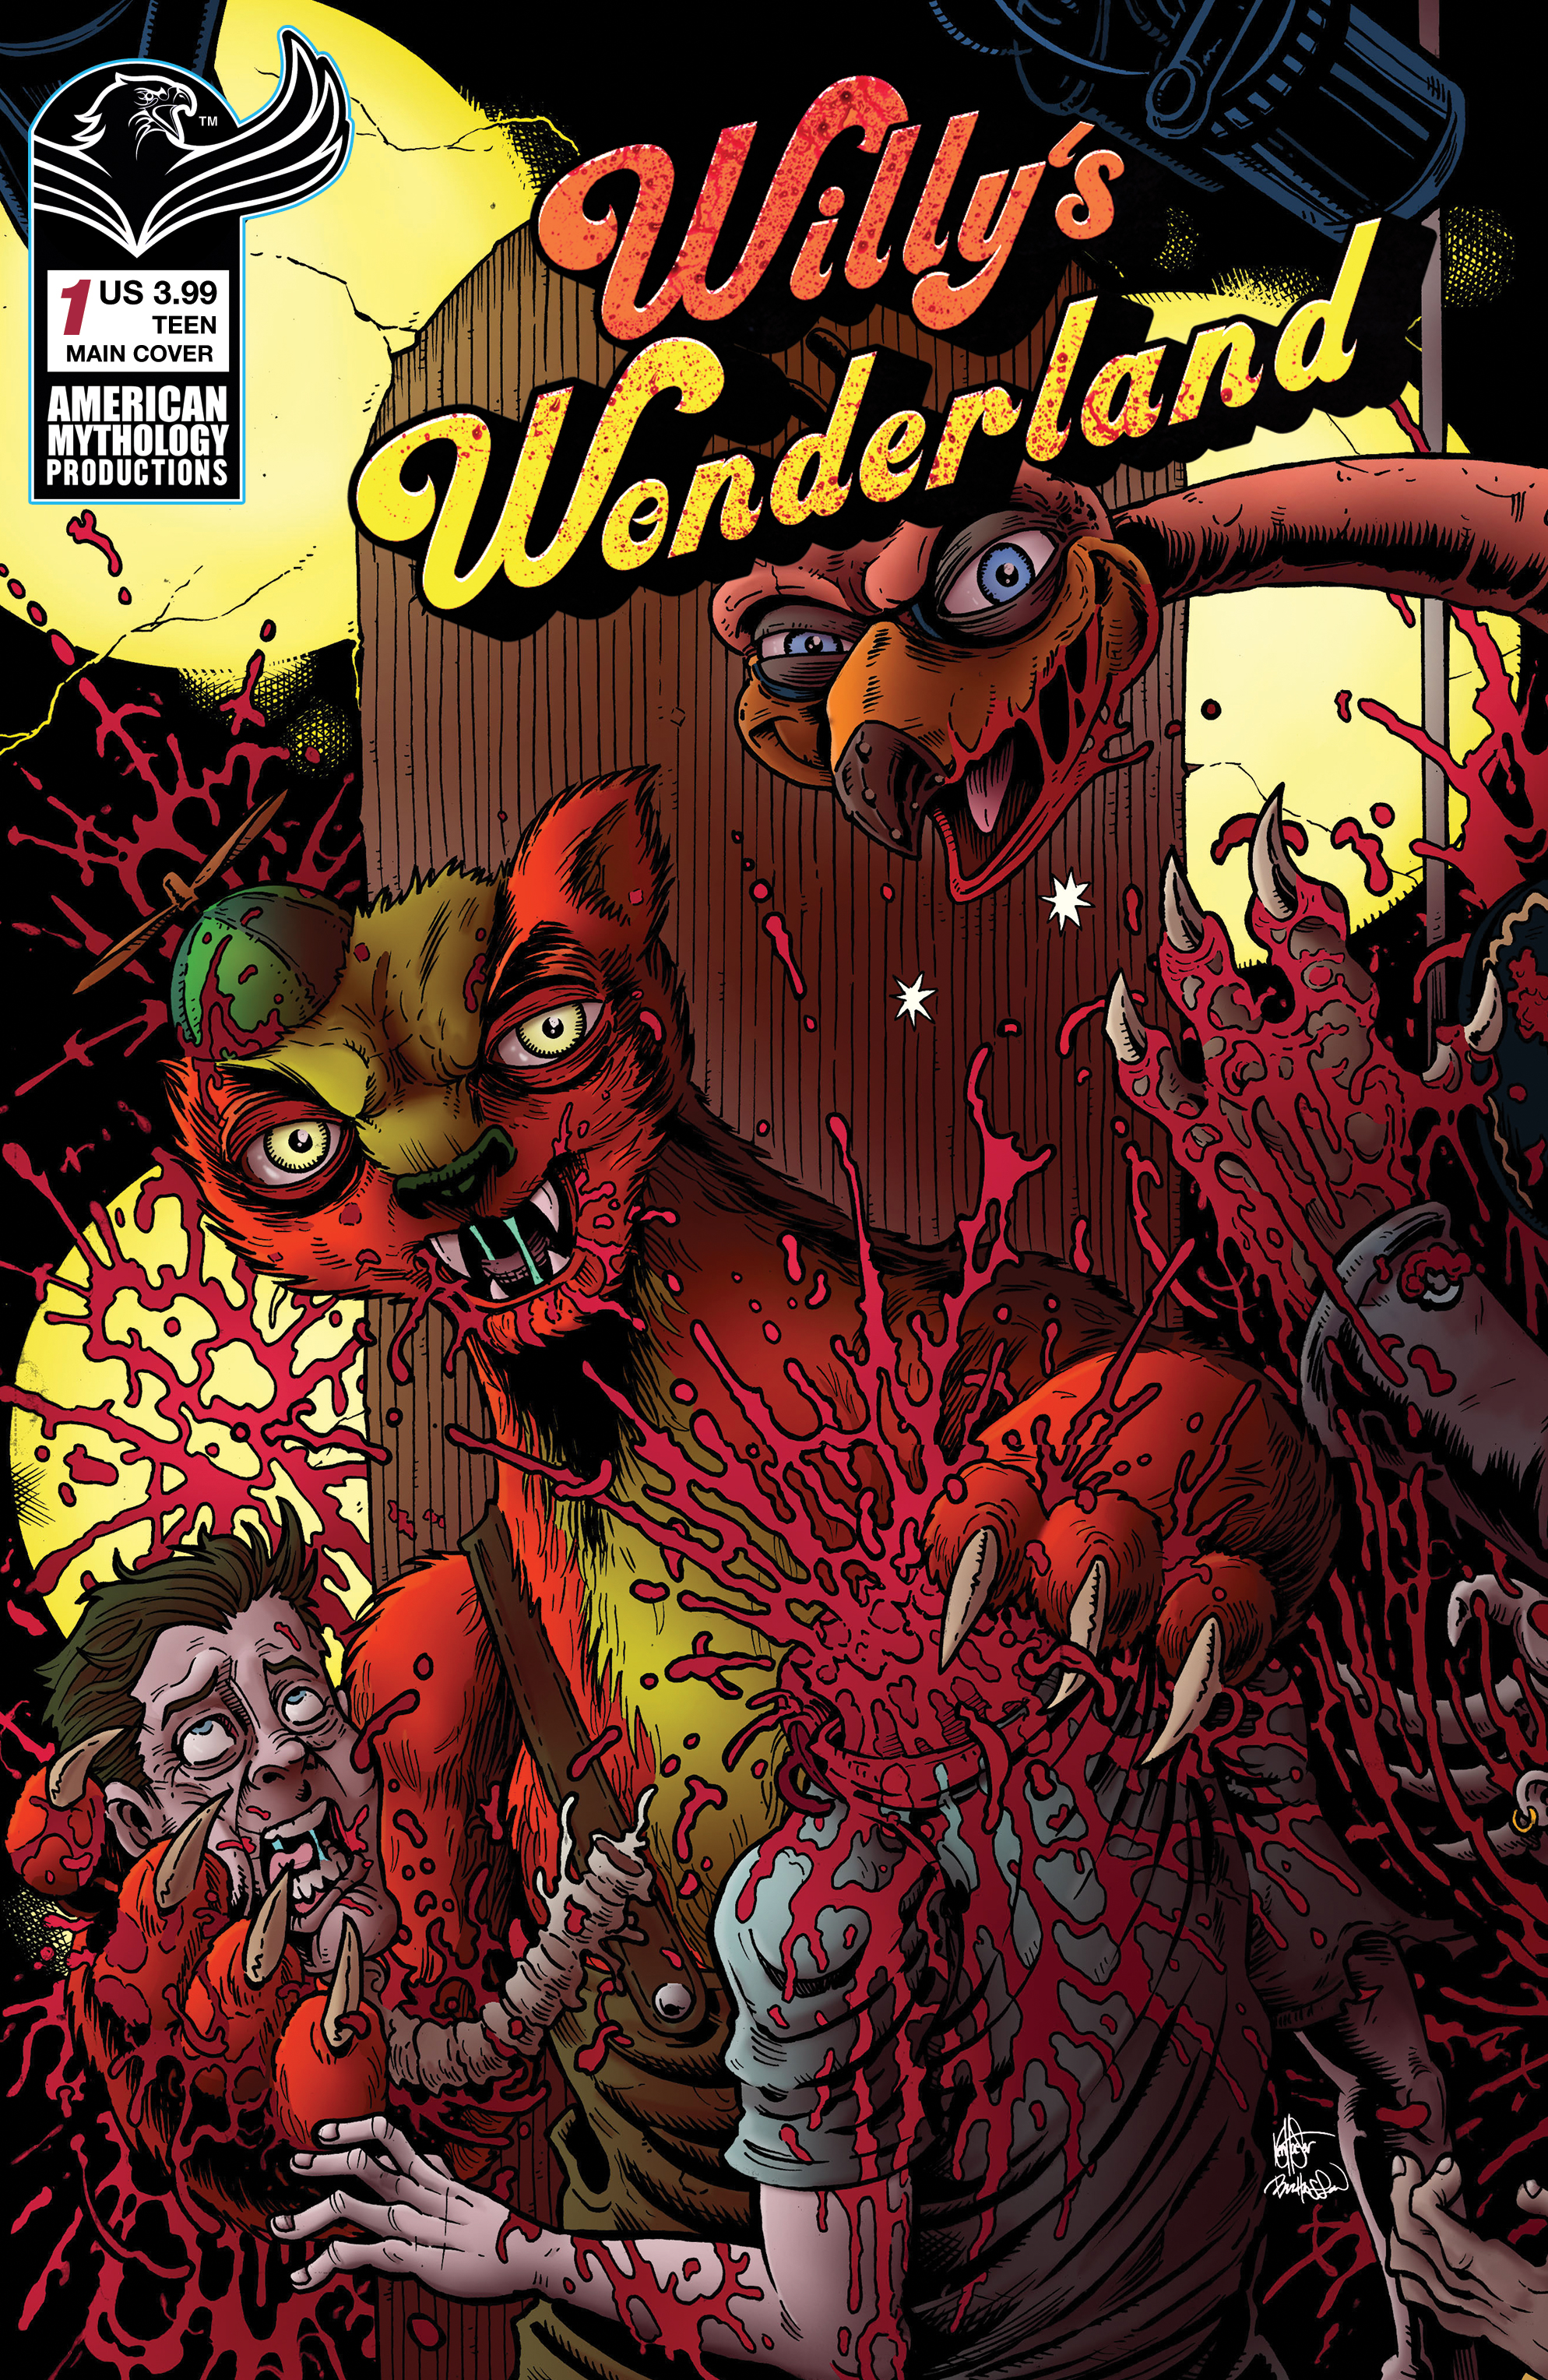 Willys Wonderland Prequel #1 Cover A Hasson & Haeser